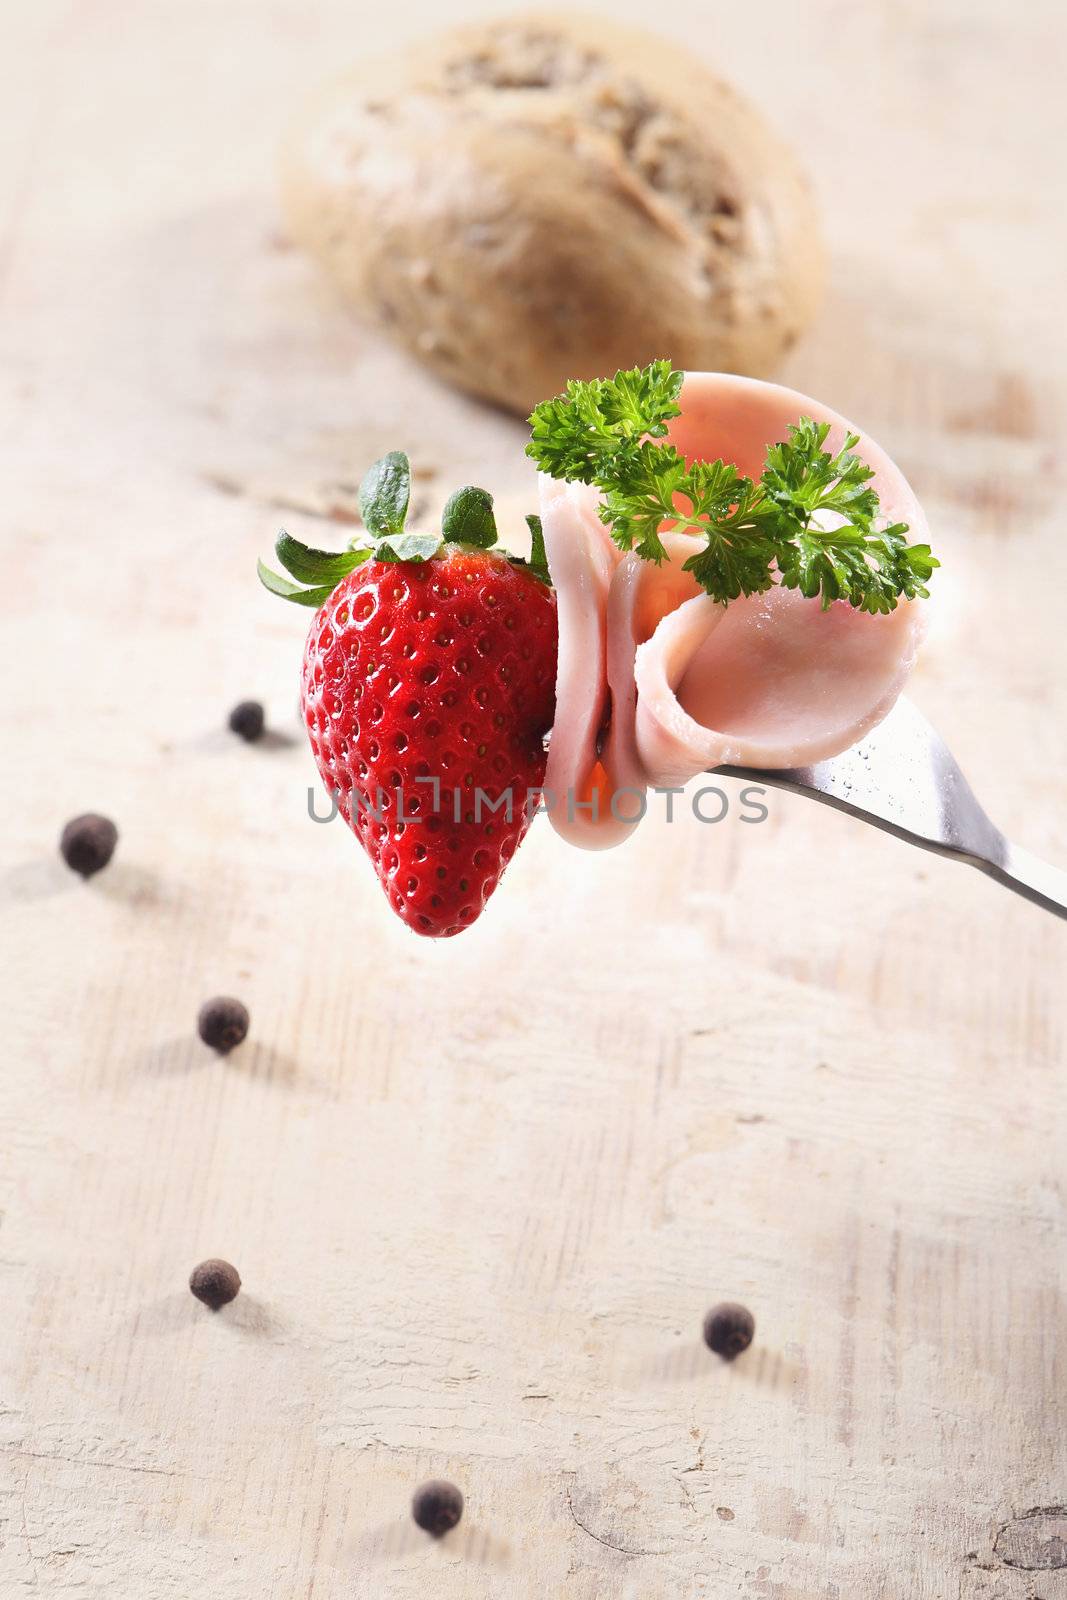 Strawberries and chop meat on a fork by robert_przybysz